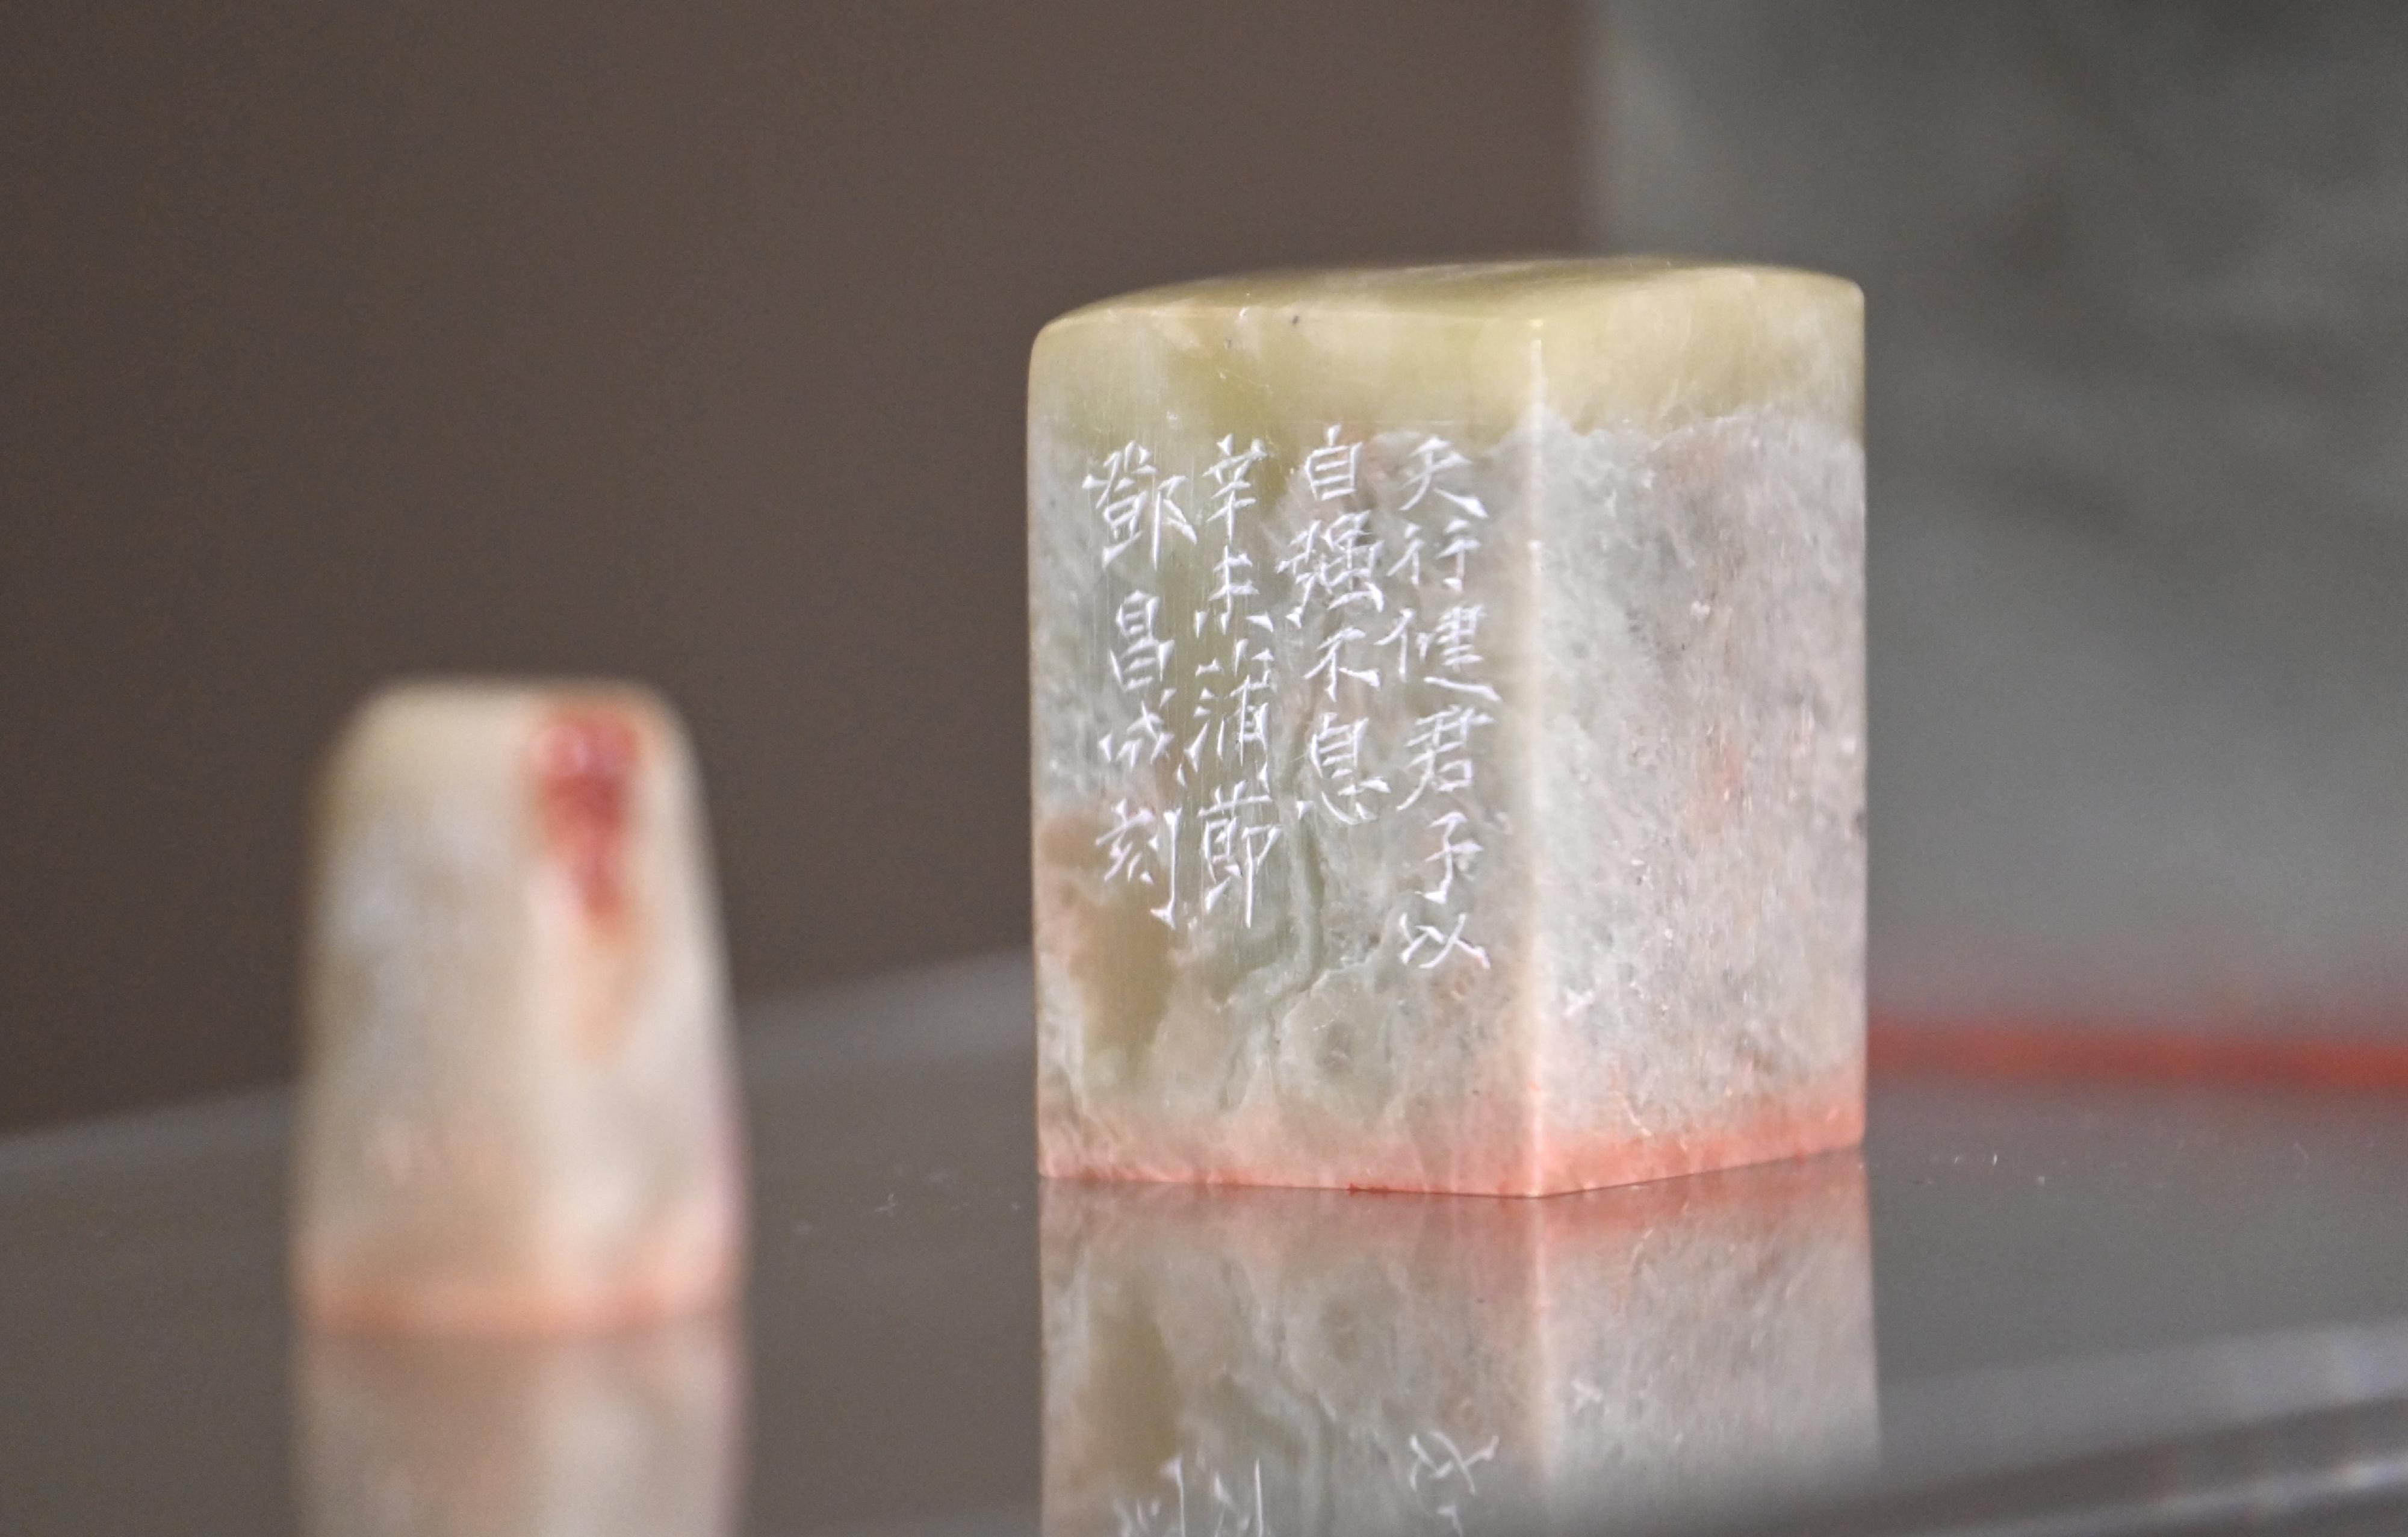 The "By the People: Creative Chinese Characters" exhibition will be staged from tomorrow (September 9) at the Hong Kong Museum of Art. Picture shows a square seal with four carved characters, "Zi Qiang Bu Xi", by Hong Kong calligrapher and seal carver Tang Cheong-shing.